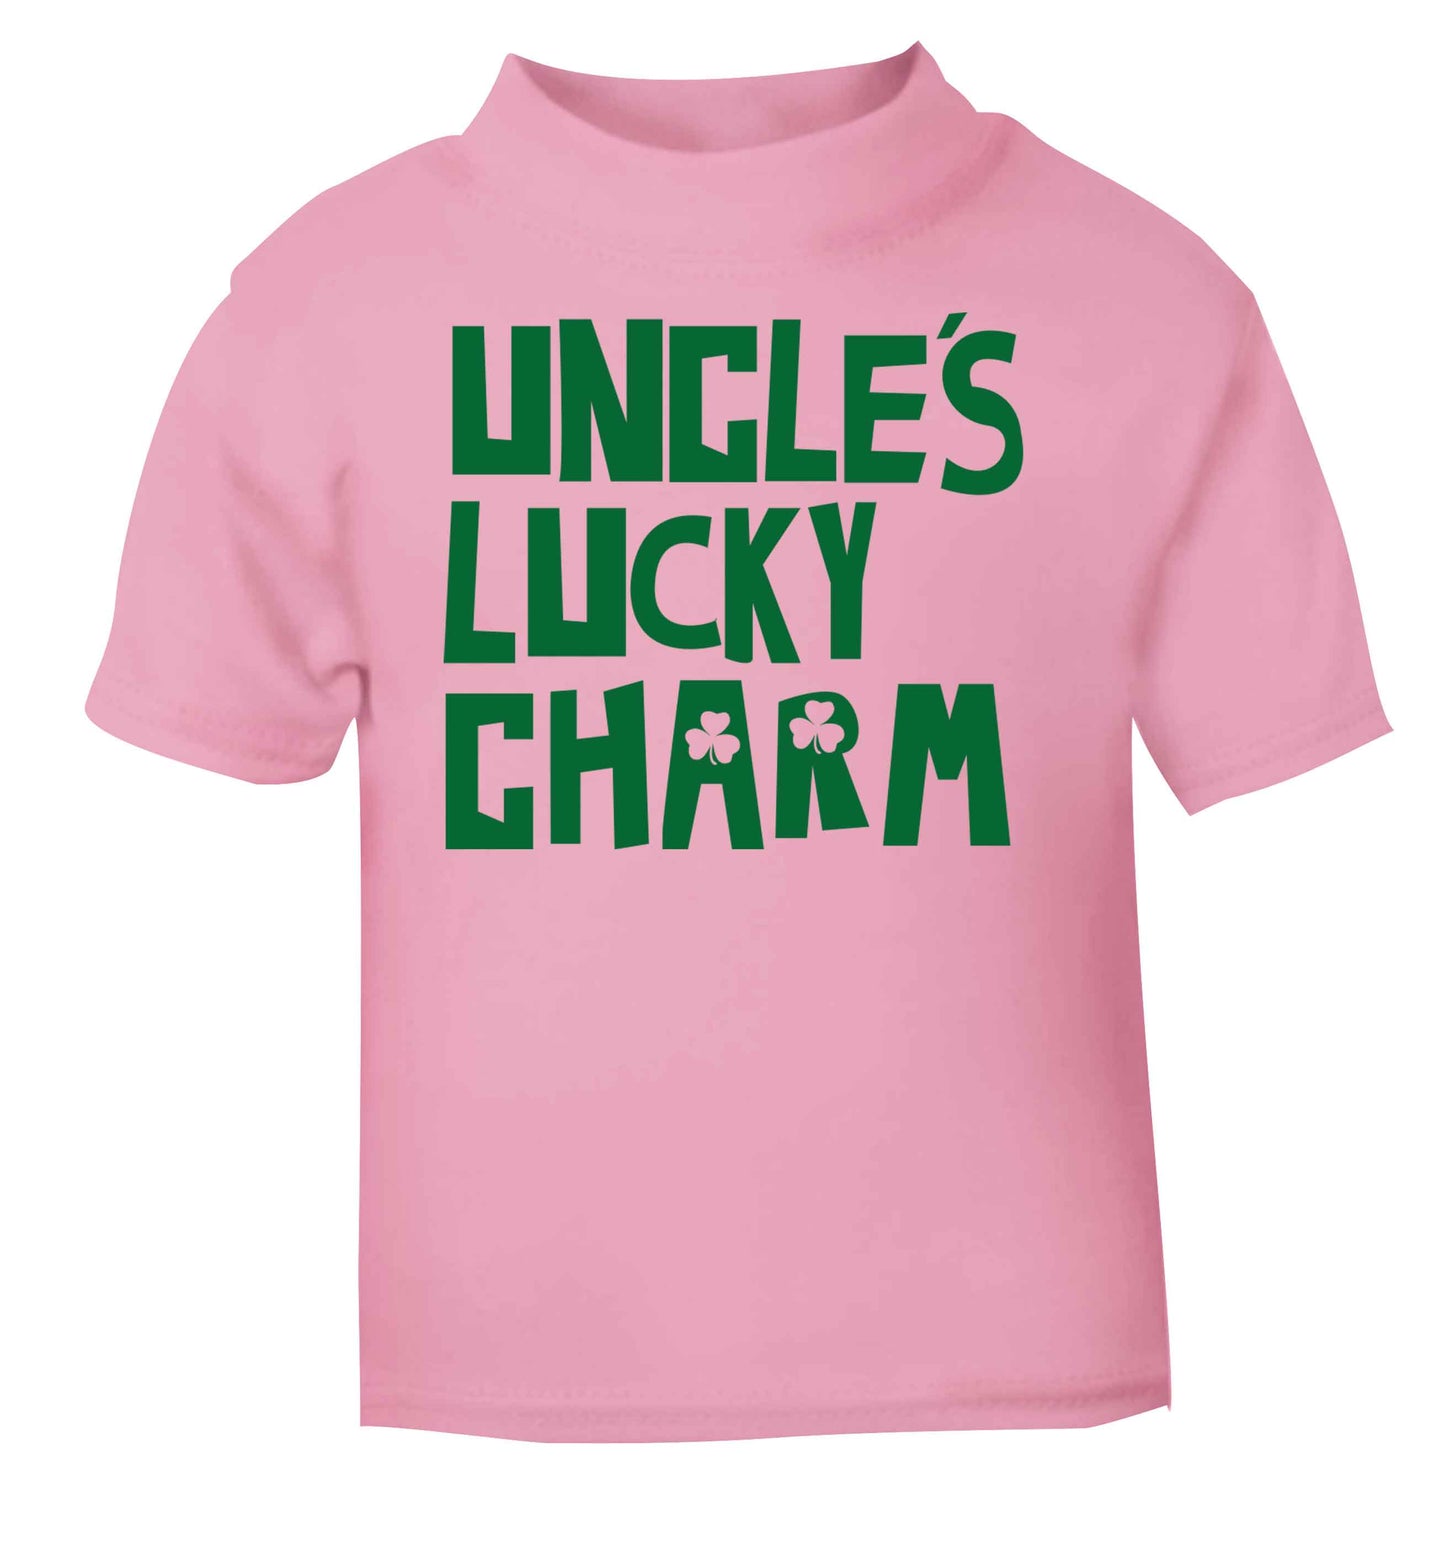 Uncles lucky charm light pink baby toddler Tshirt 2 Years